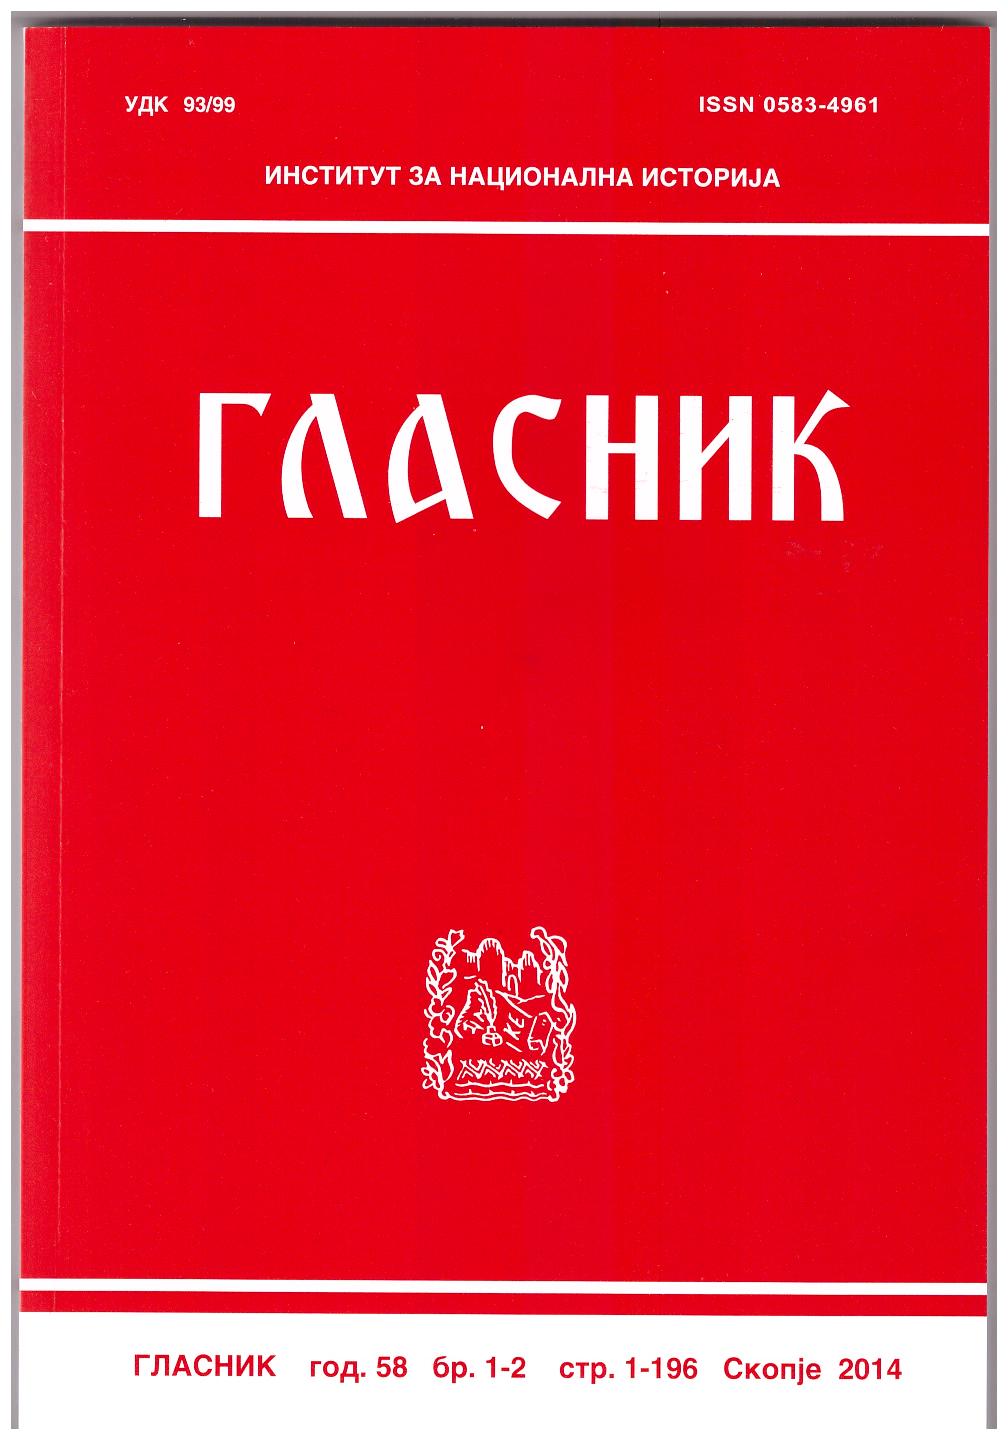 THE PARTICIPATION AND ACTIVITY OF MILIVOJ TRBIЌ-VOJЧE IN THE EQUAL MOVEMENT IN MACEDONIA (1942 - 1944) Cover Image